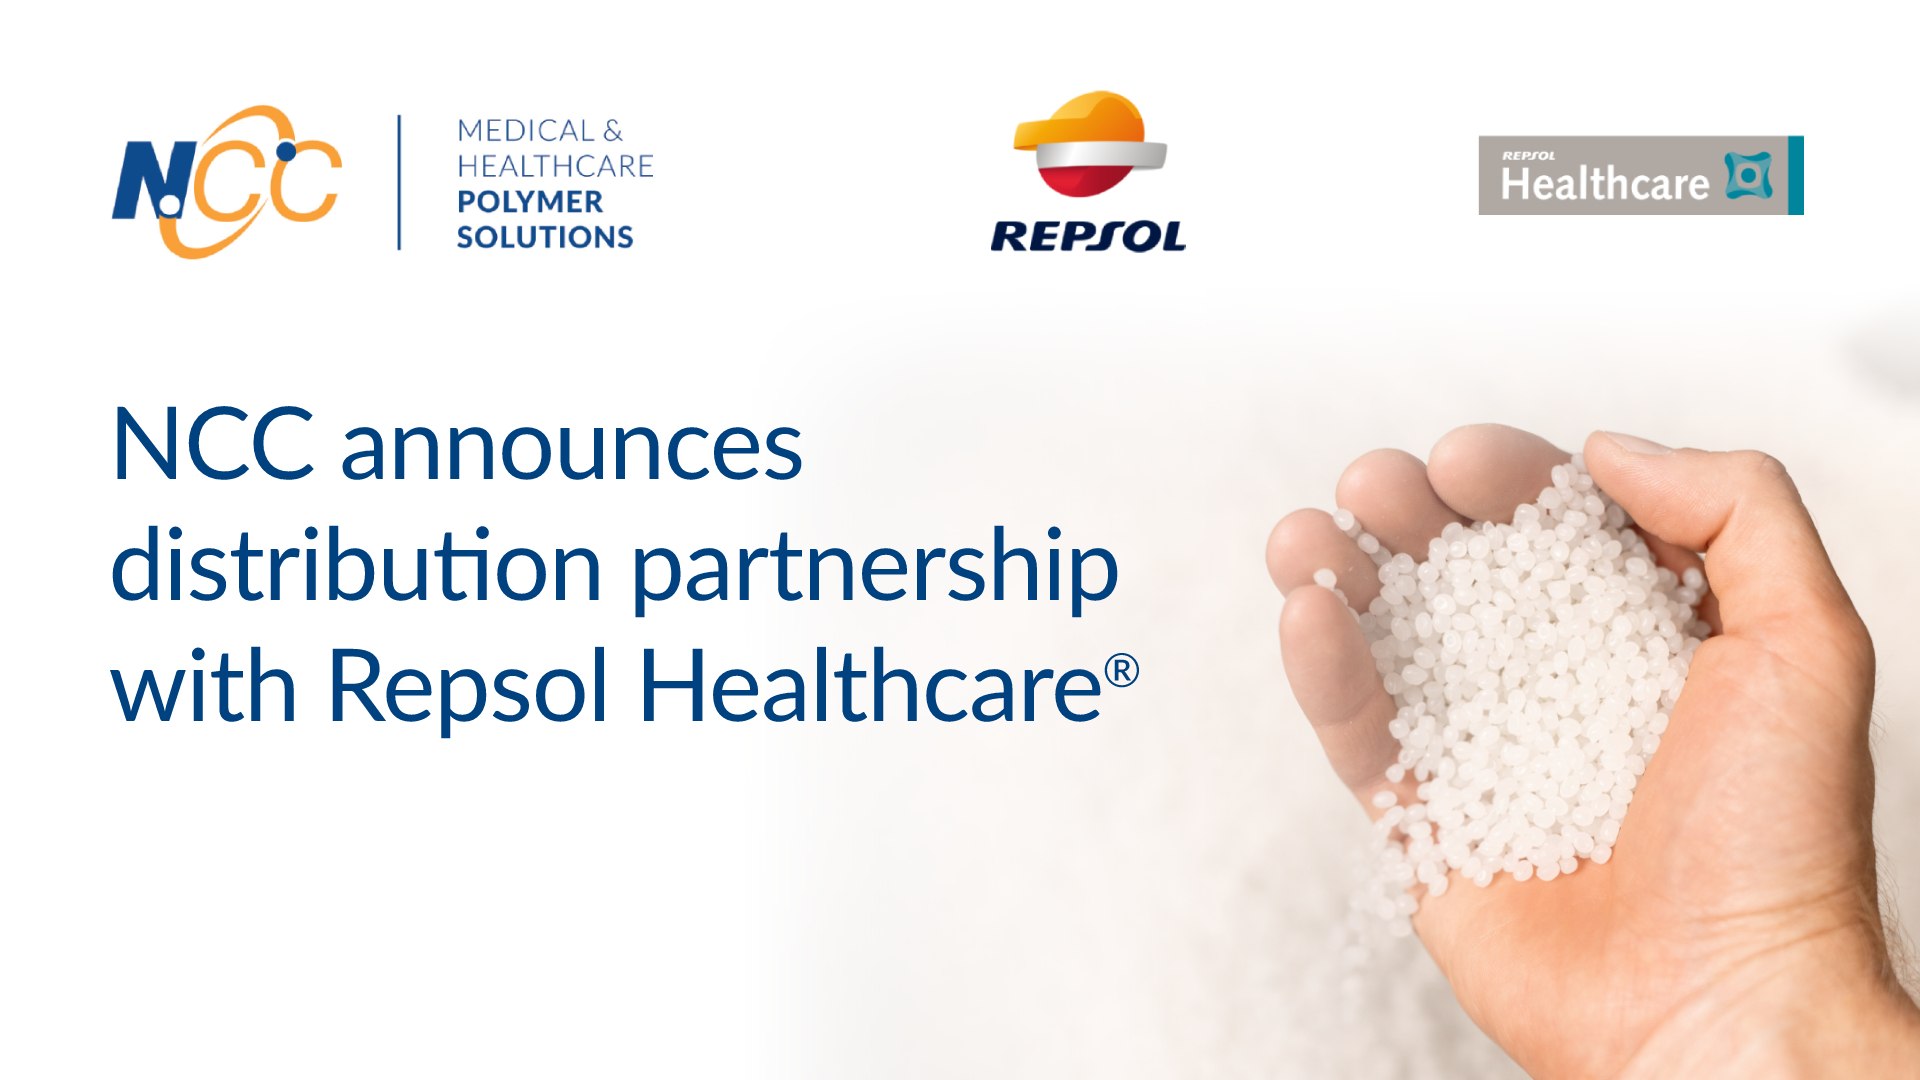 NCC Medical & Healthcare Polymer Solutions announces distribution partnership with Repsol